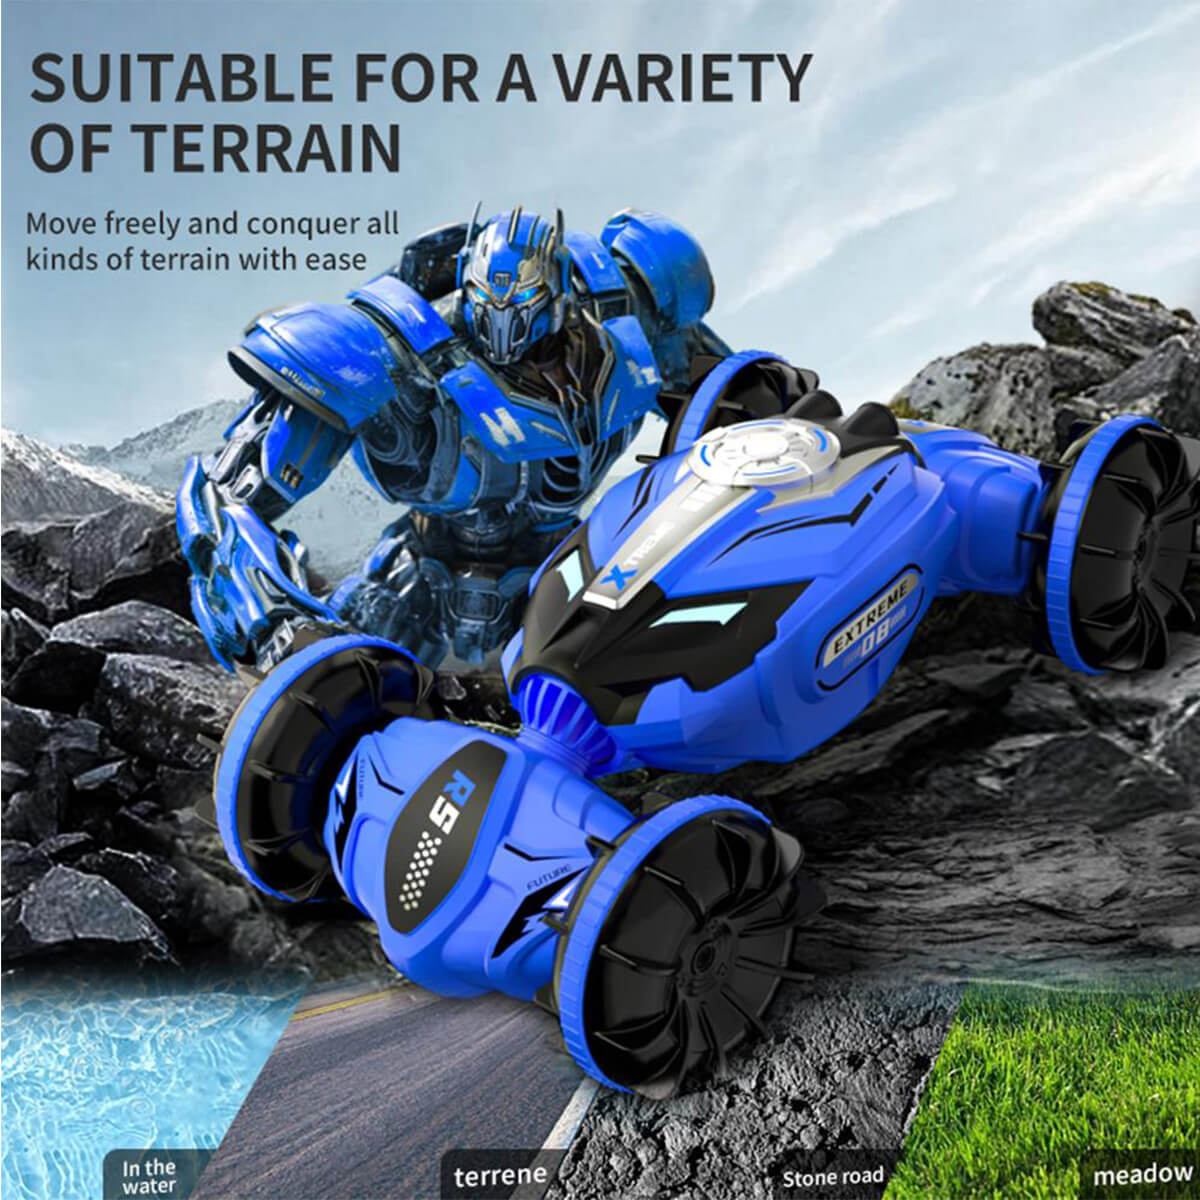 Amphibious RC Stunt Car Drive Double Sided Transforming 2.4G RC Car w/ Remote and Gesture Control